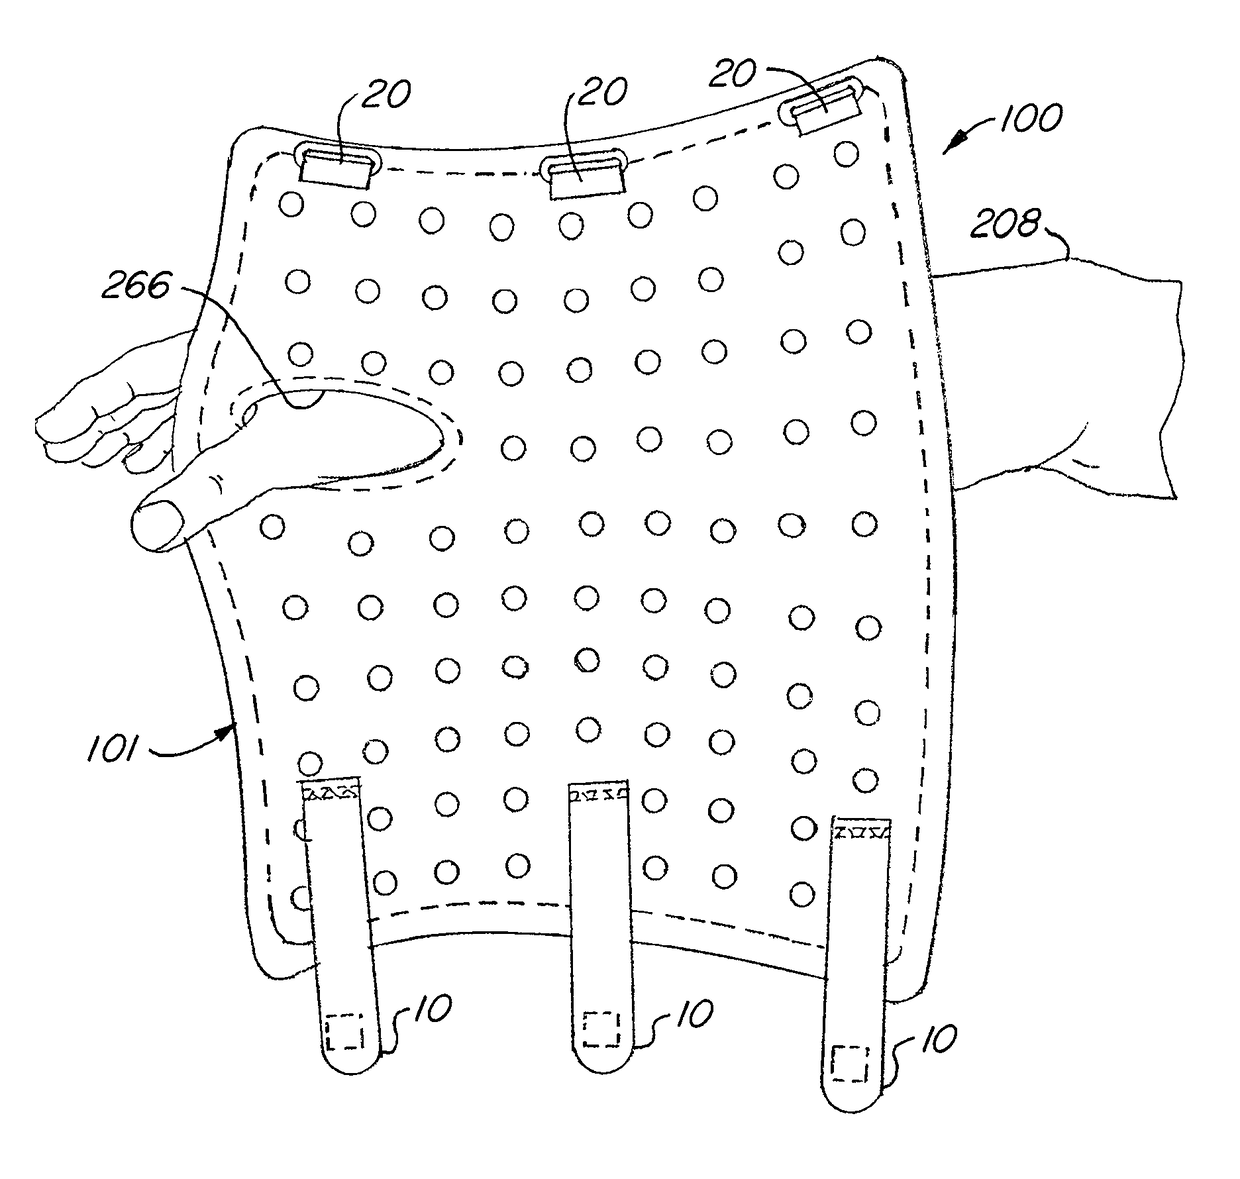 Self-Fitting, Self-Adjusting, Automatically Adjusting and/or Automatically Fitting Orthopedic or other (e.g. non human use) Immobilization Splint or Device